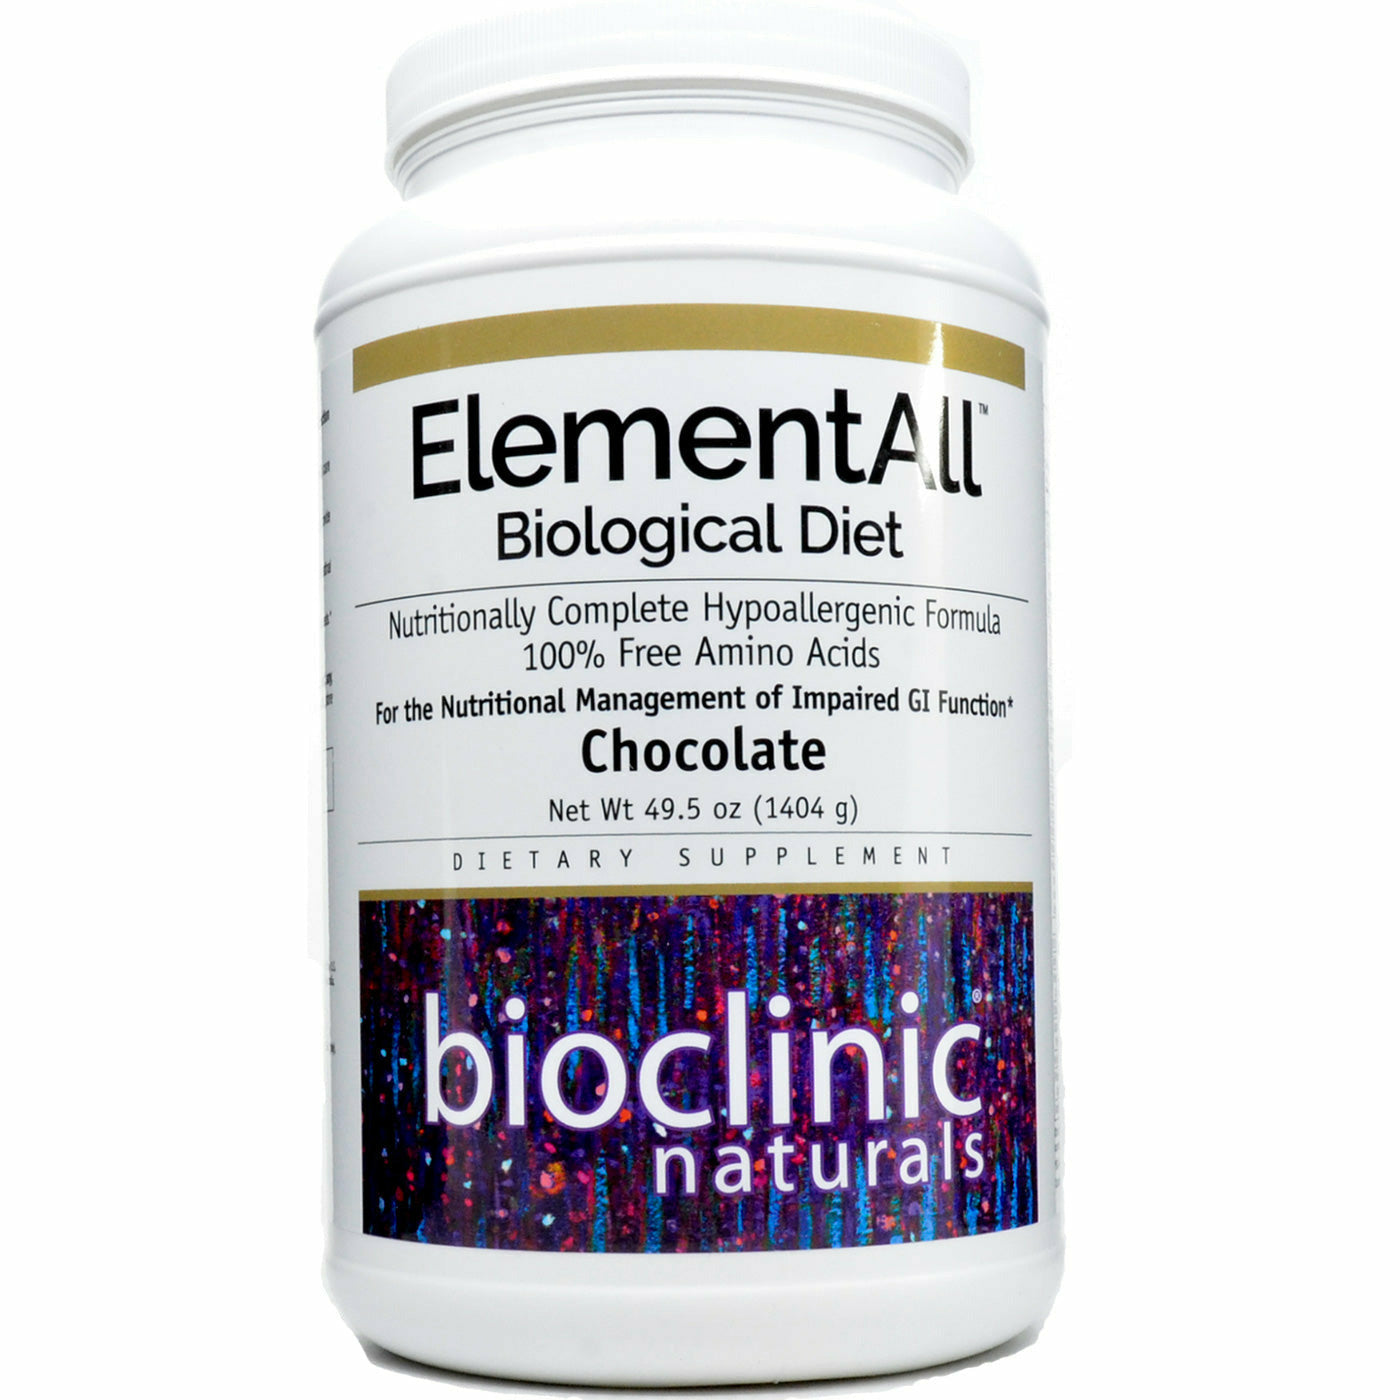 Image of ElementAll Biological Diet Chocolate 9 servings By Bioclinic Naturals